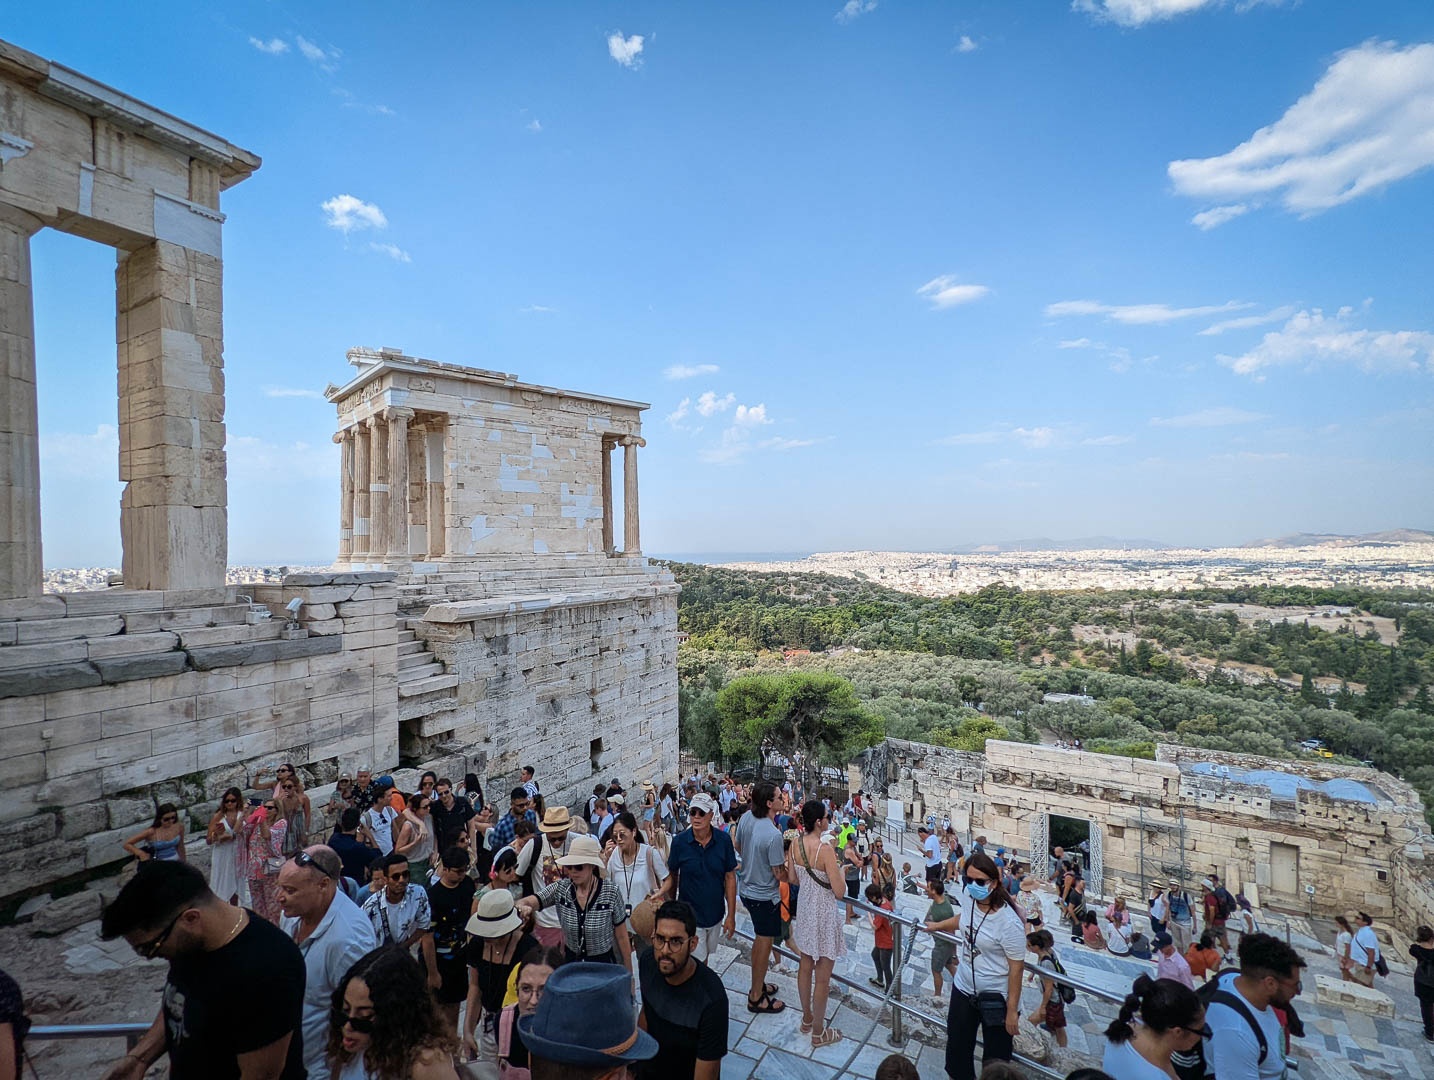 Many are those who would climb the Acropolis